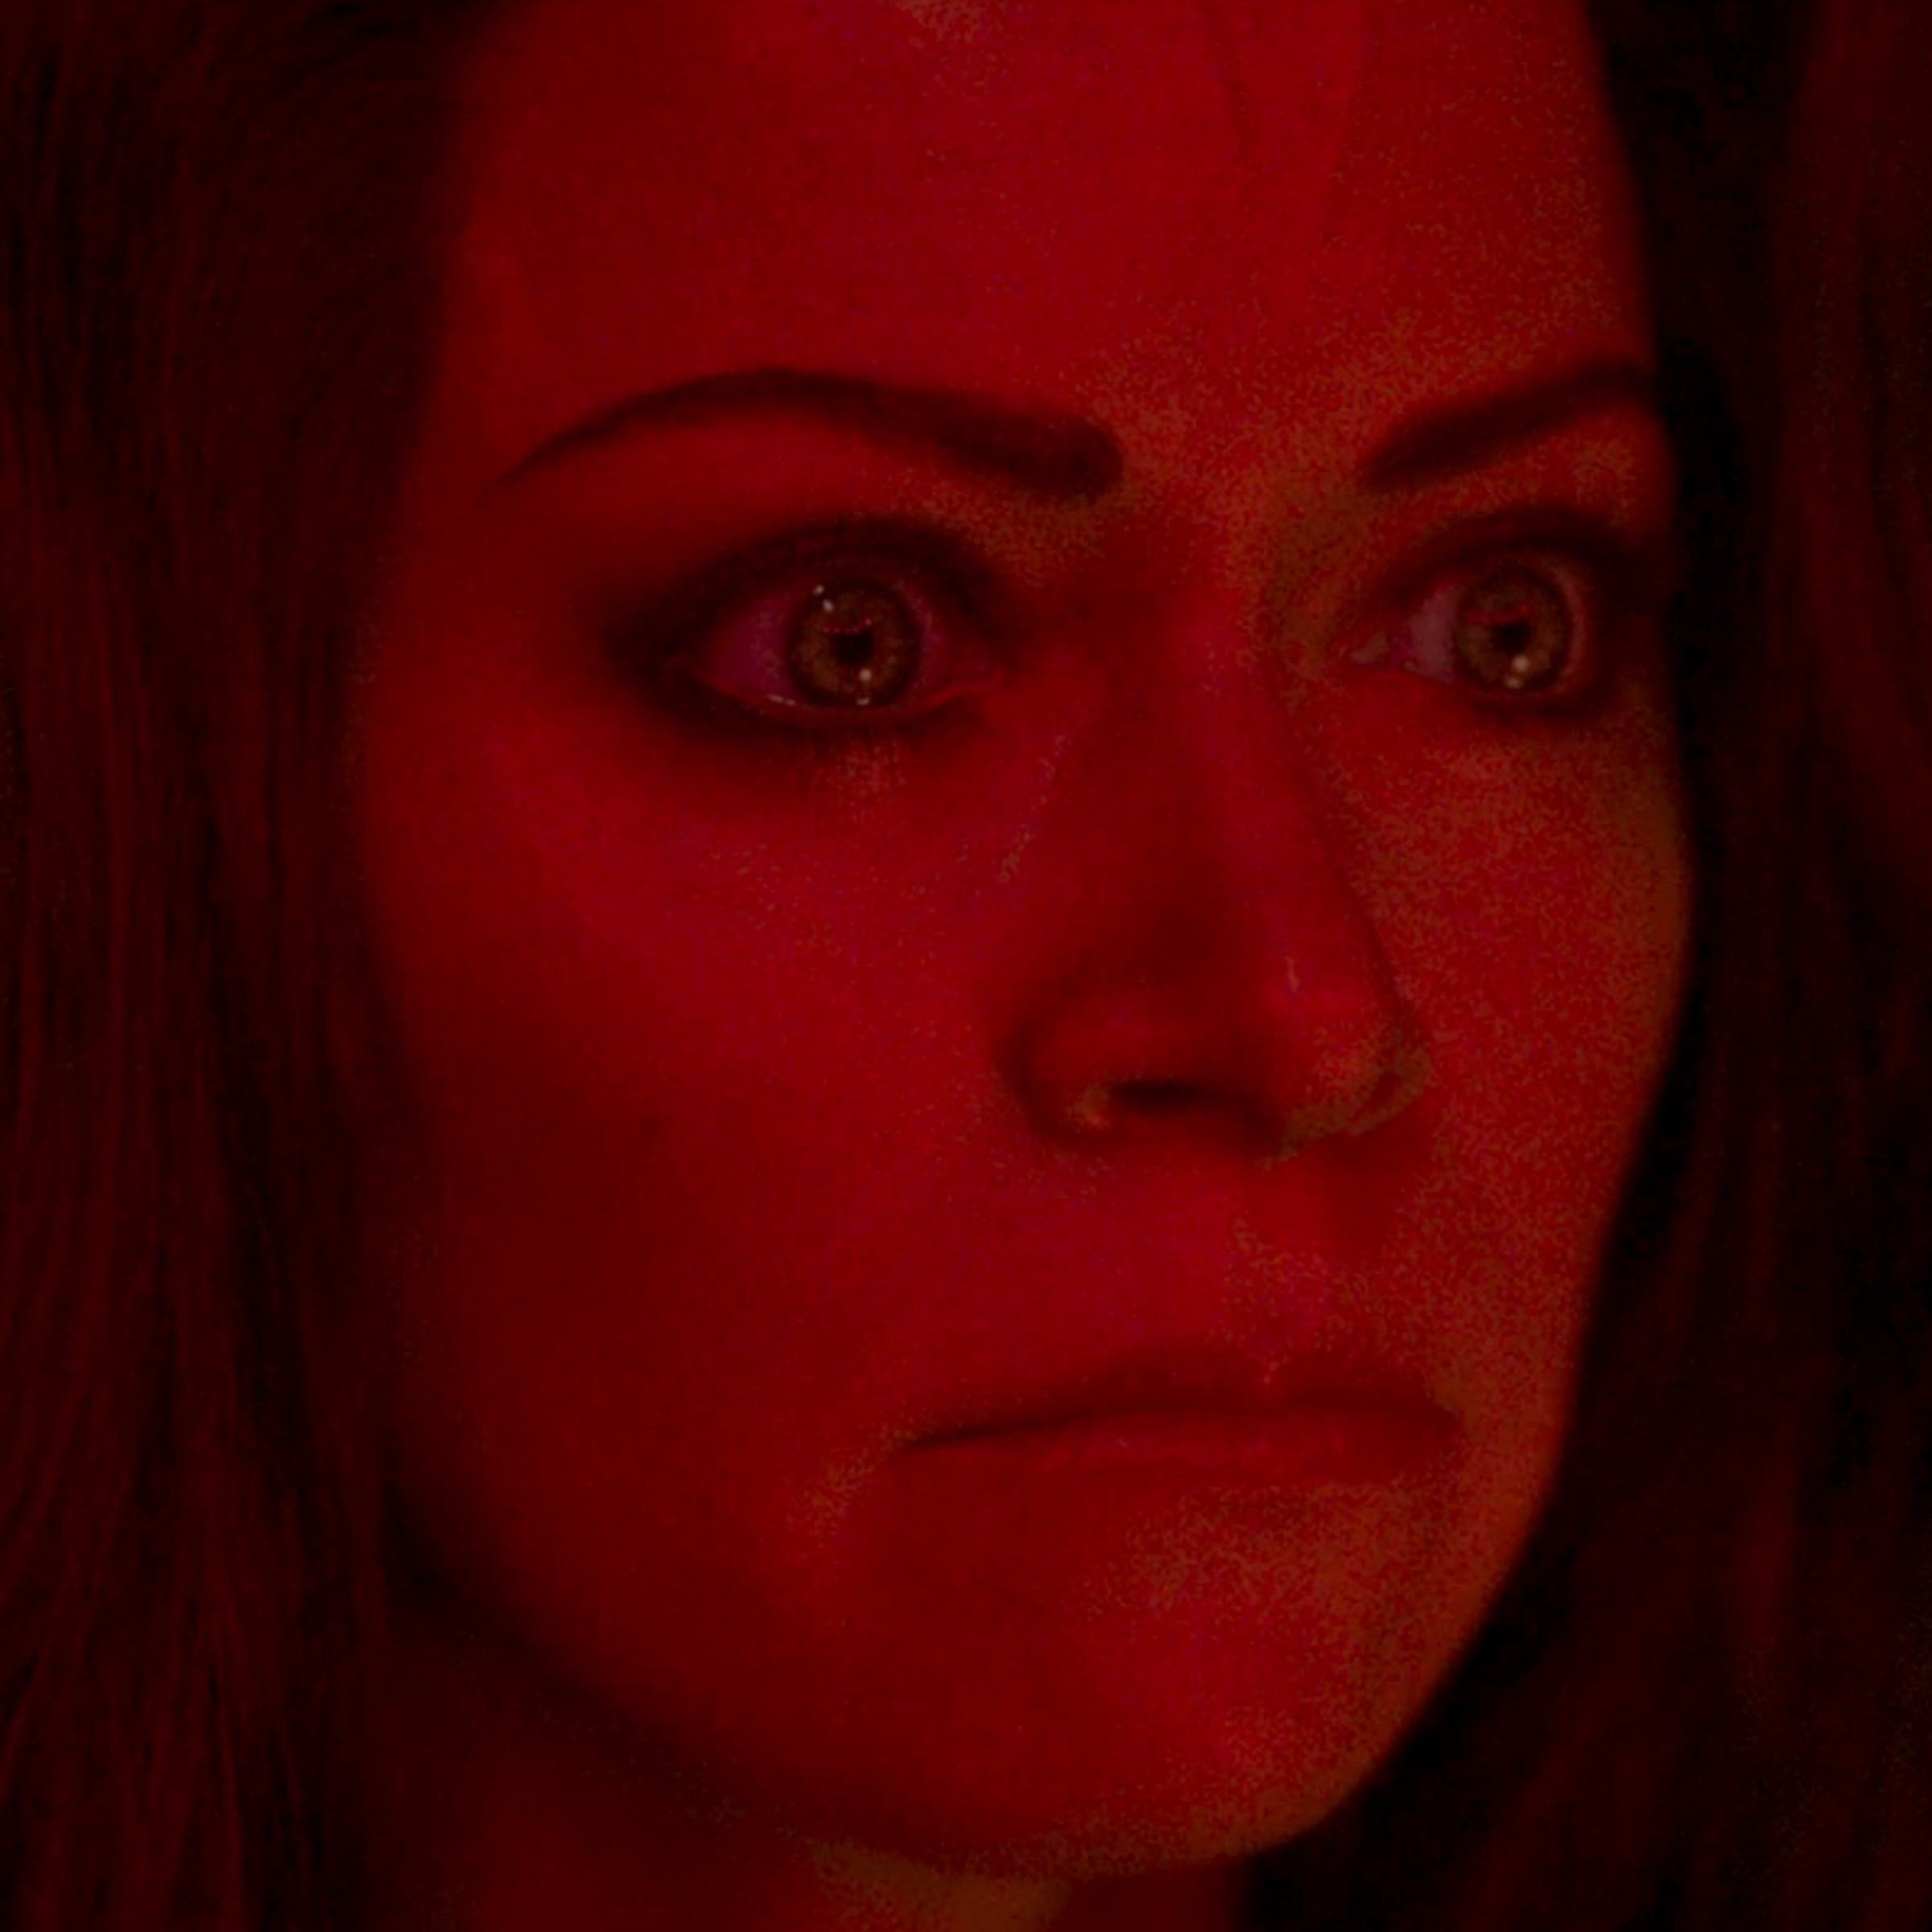 A close-up shot of a tall, green-skinned woman whose face is contorted in anger. Though the woman’s skin is green, she’s bathed in a harsh red light here that makes her look red as well.